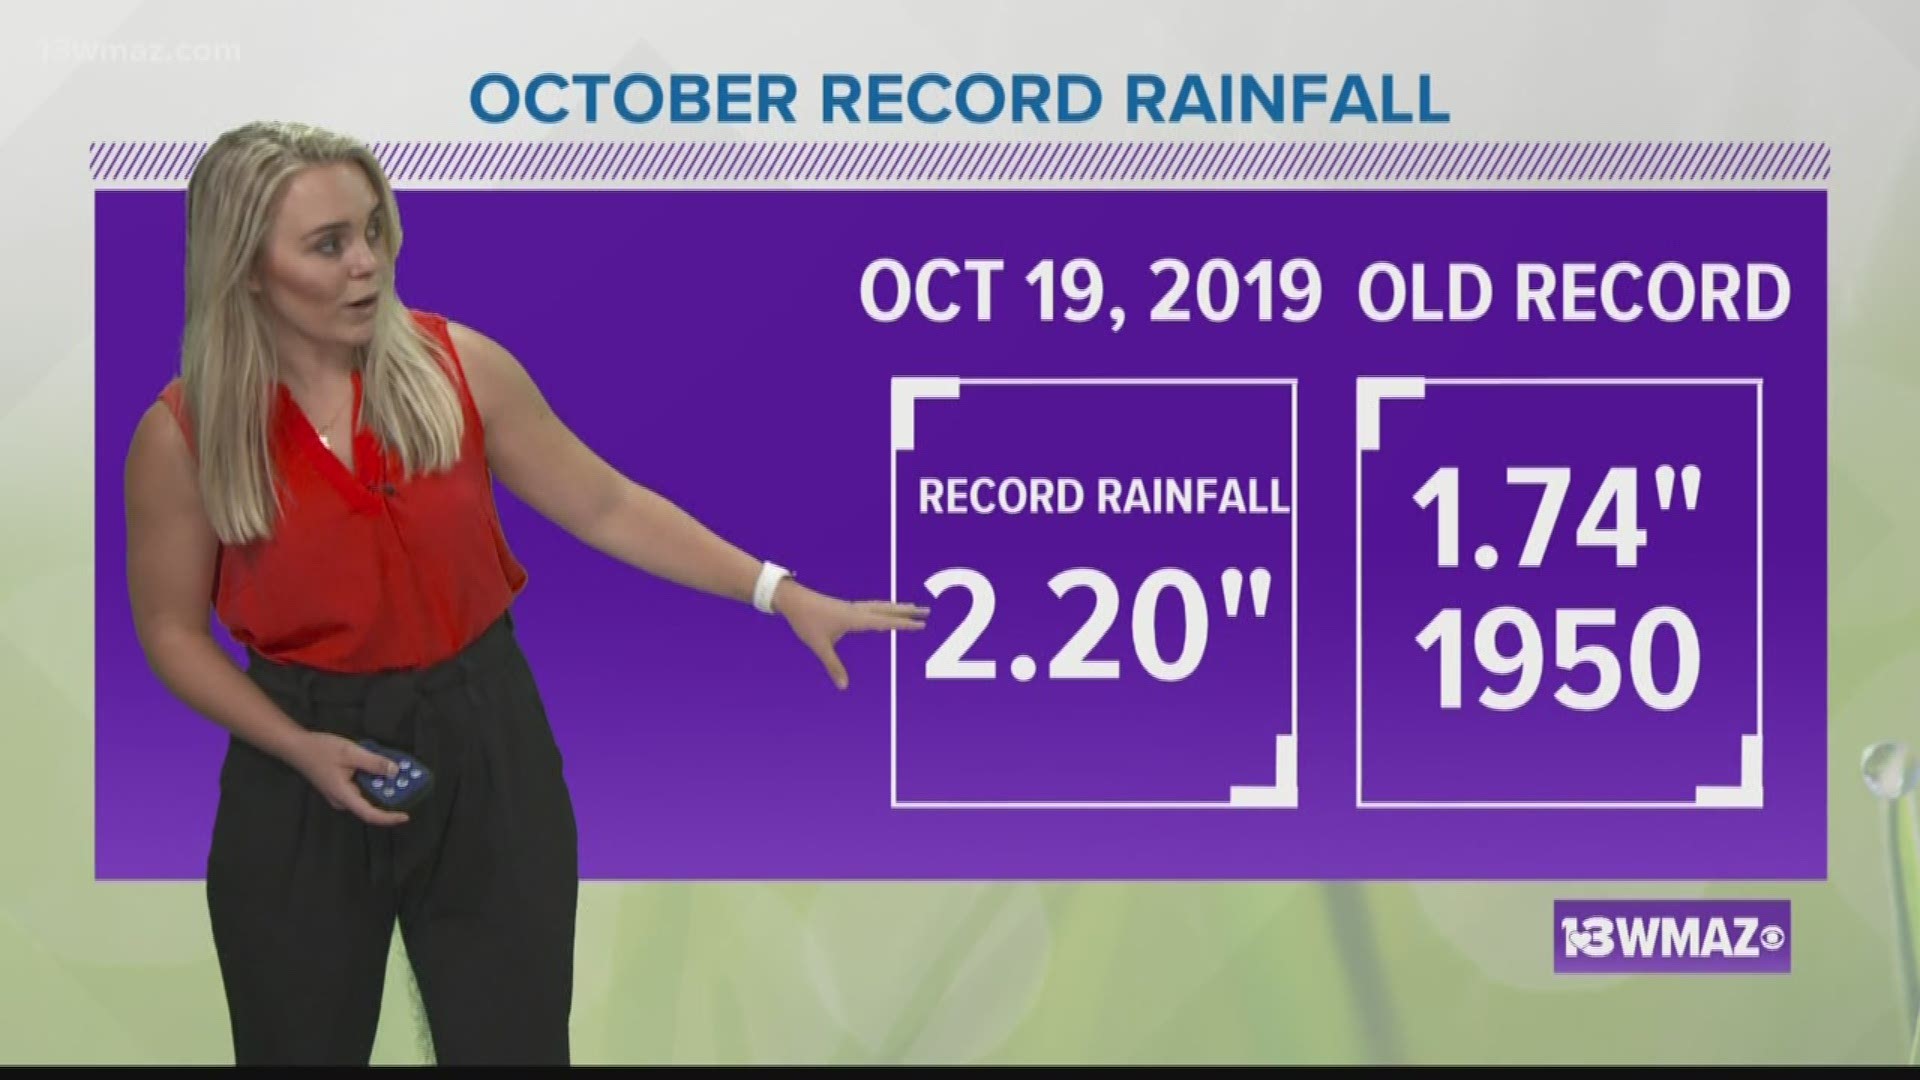 We wished for rain and we sure got it, although we're not out of our drought or our deficit. So far, October has picked up just under 3.5" of rain.